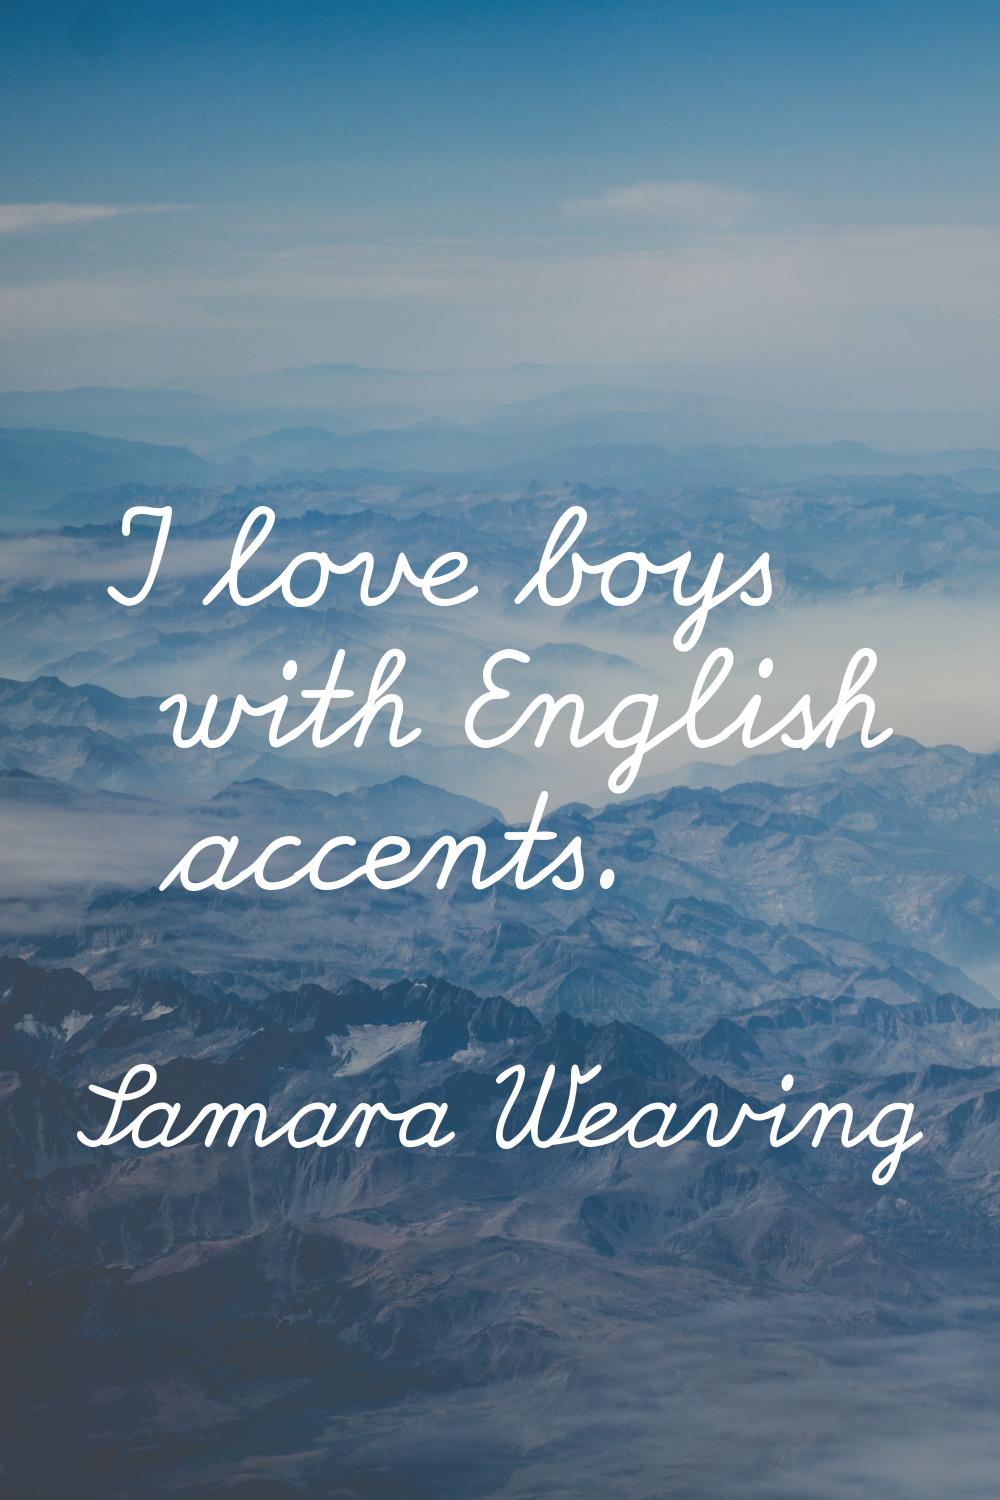 I love boys with English accents.